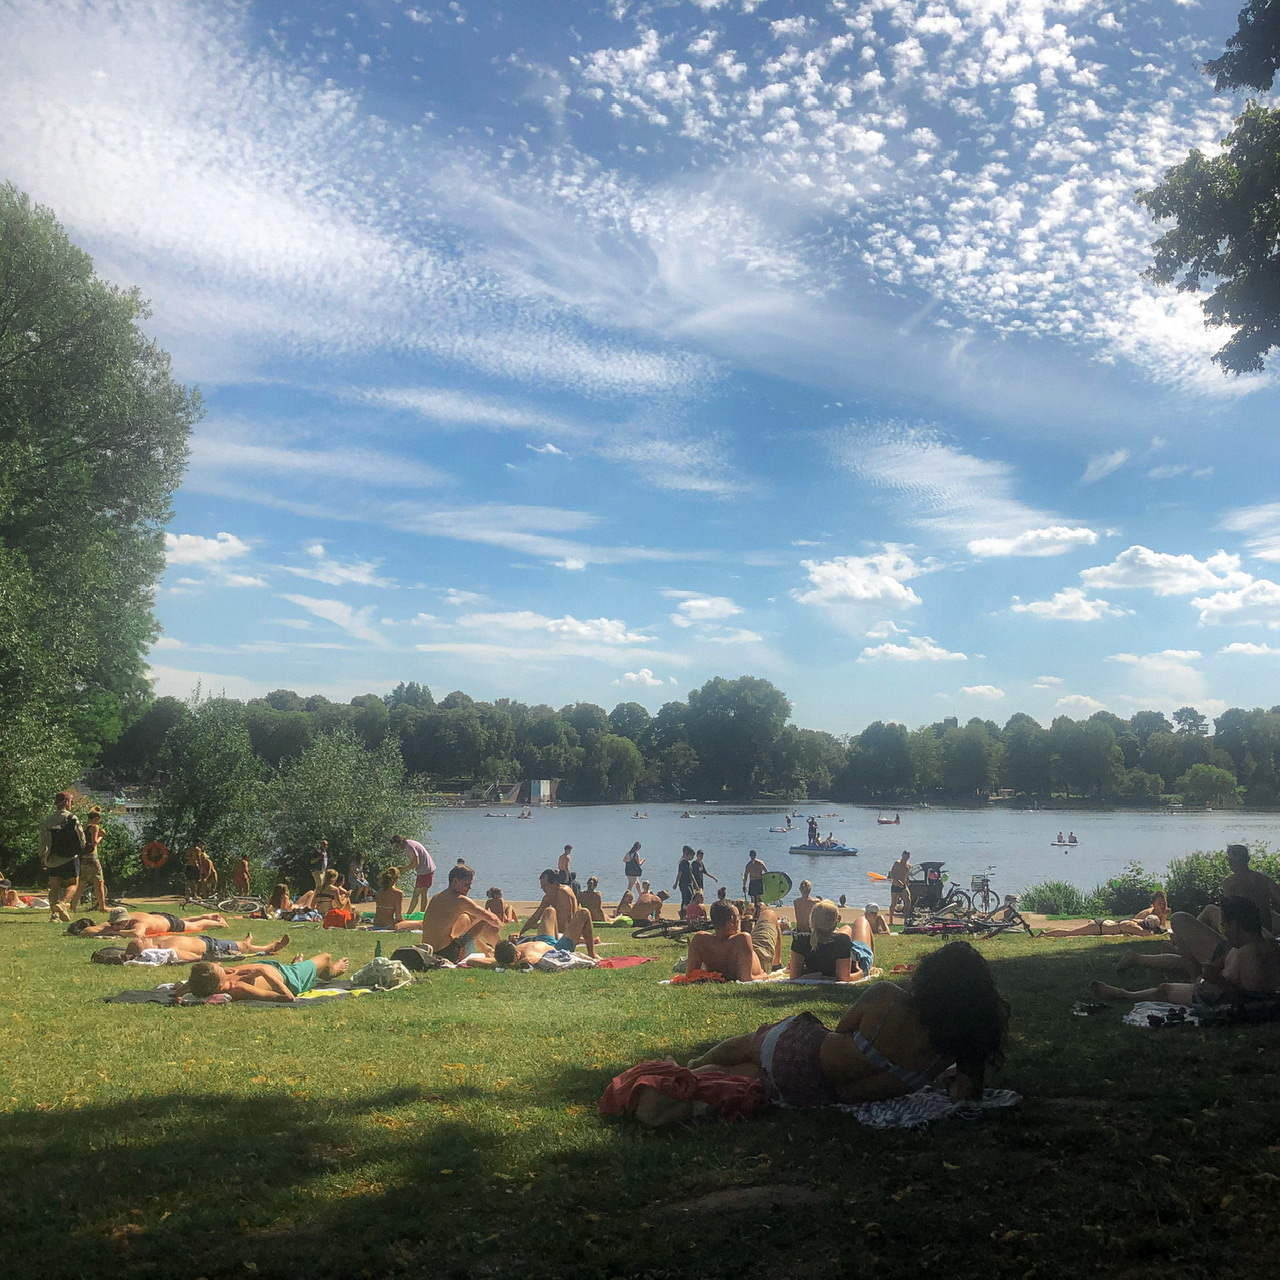 View of lake and people on grass in Stadtpark